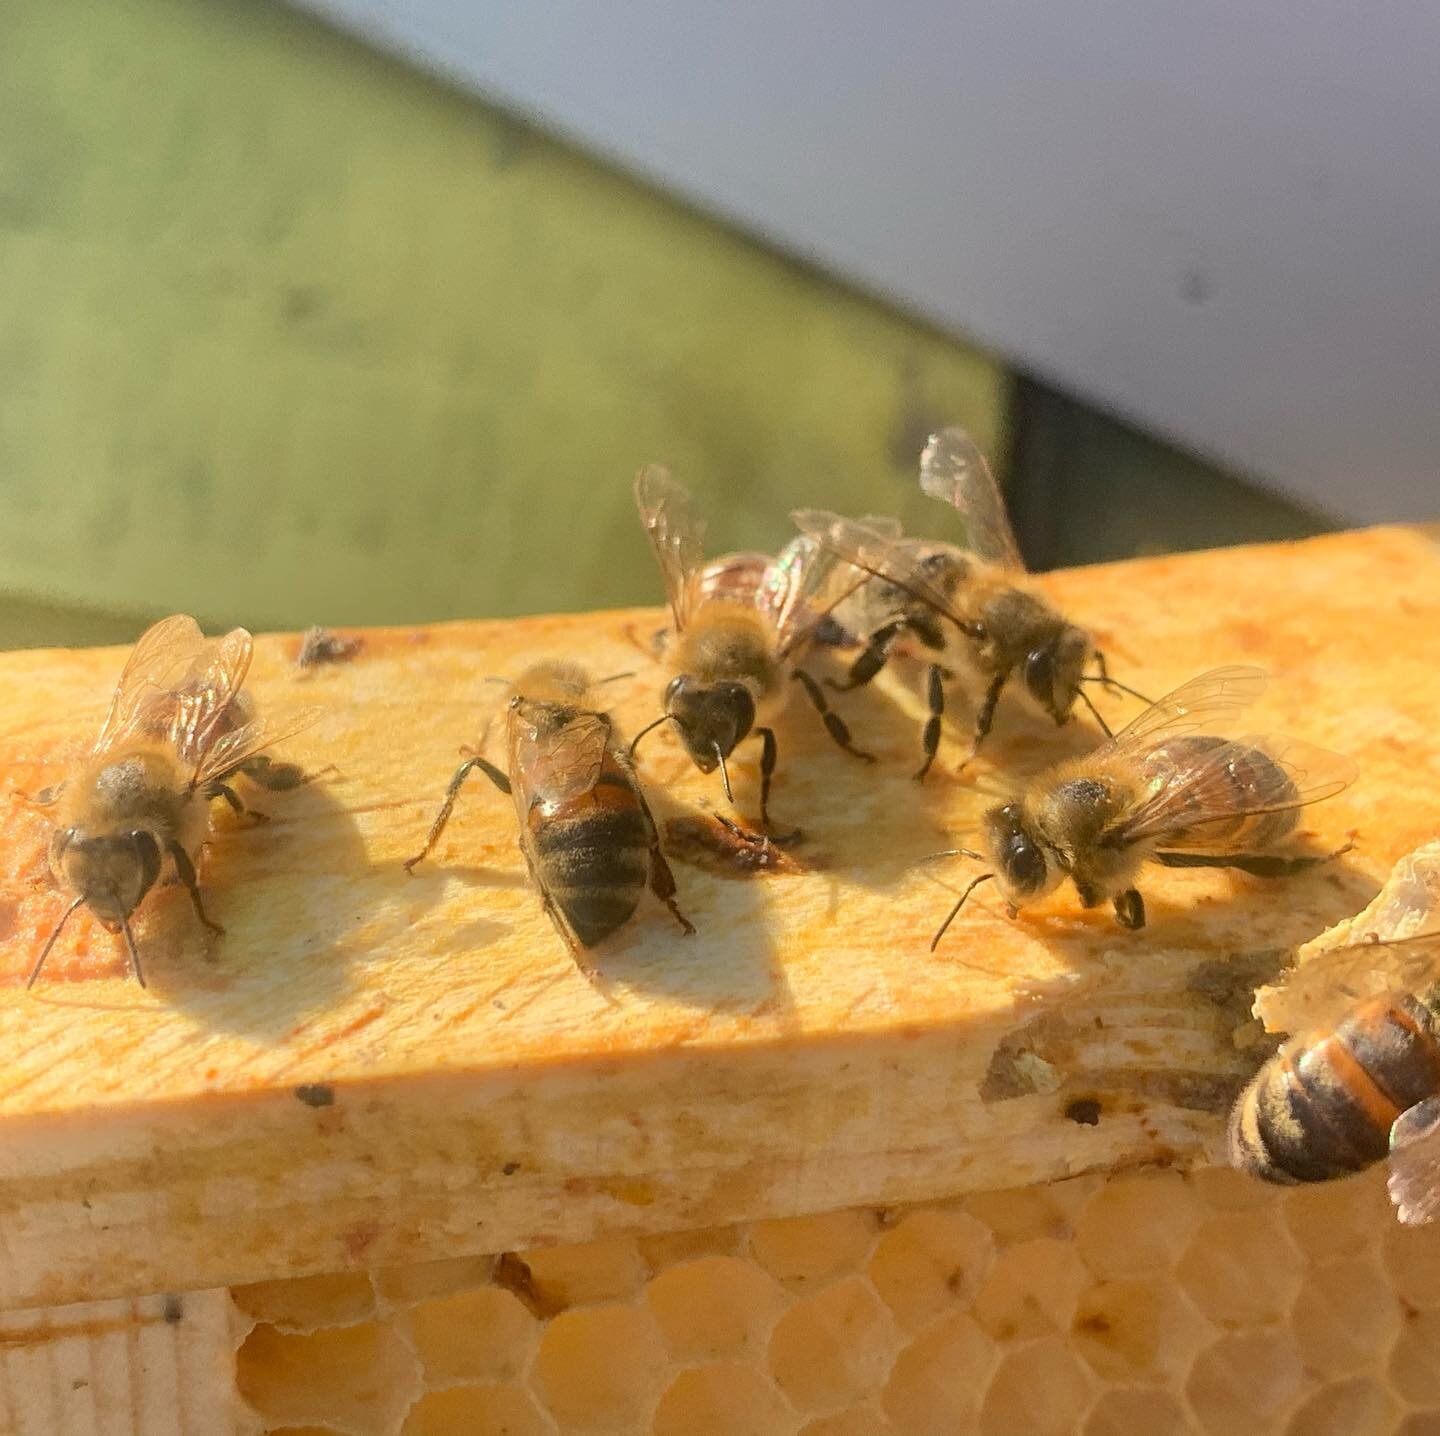 &ldquo;They&rsquo;ve started bringing pollen in!&rdquo; - Beekeeper  Bob🐝 #honeybees #mn #farmstrong #treeblossoms